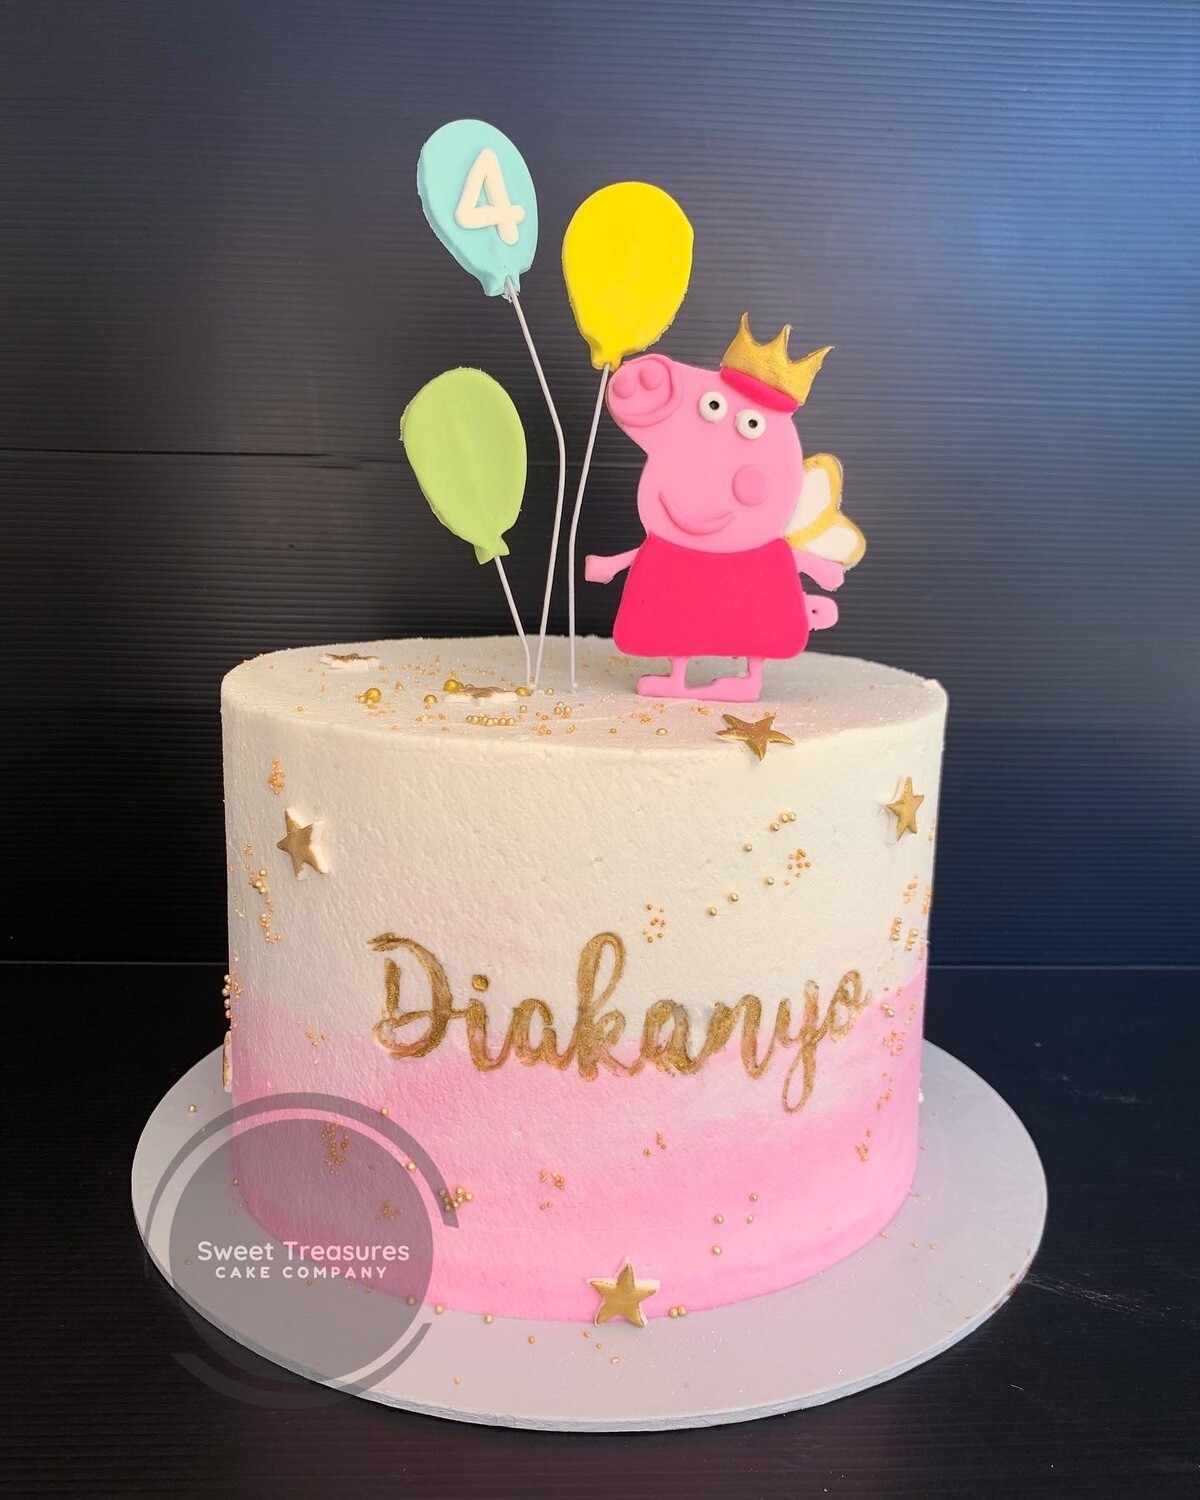 Peppa Pig Single tier Cake, Size: 7 inches (18cm wide): 3 layers tall (12cm), 2 layers of filling: up to 12 Servings, Upsize (Add Layer to make taller and serve more guests);: No thank you